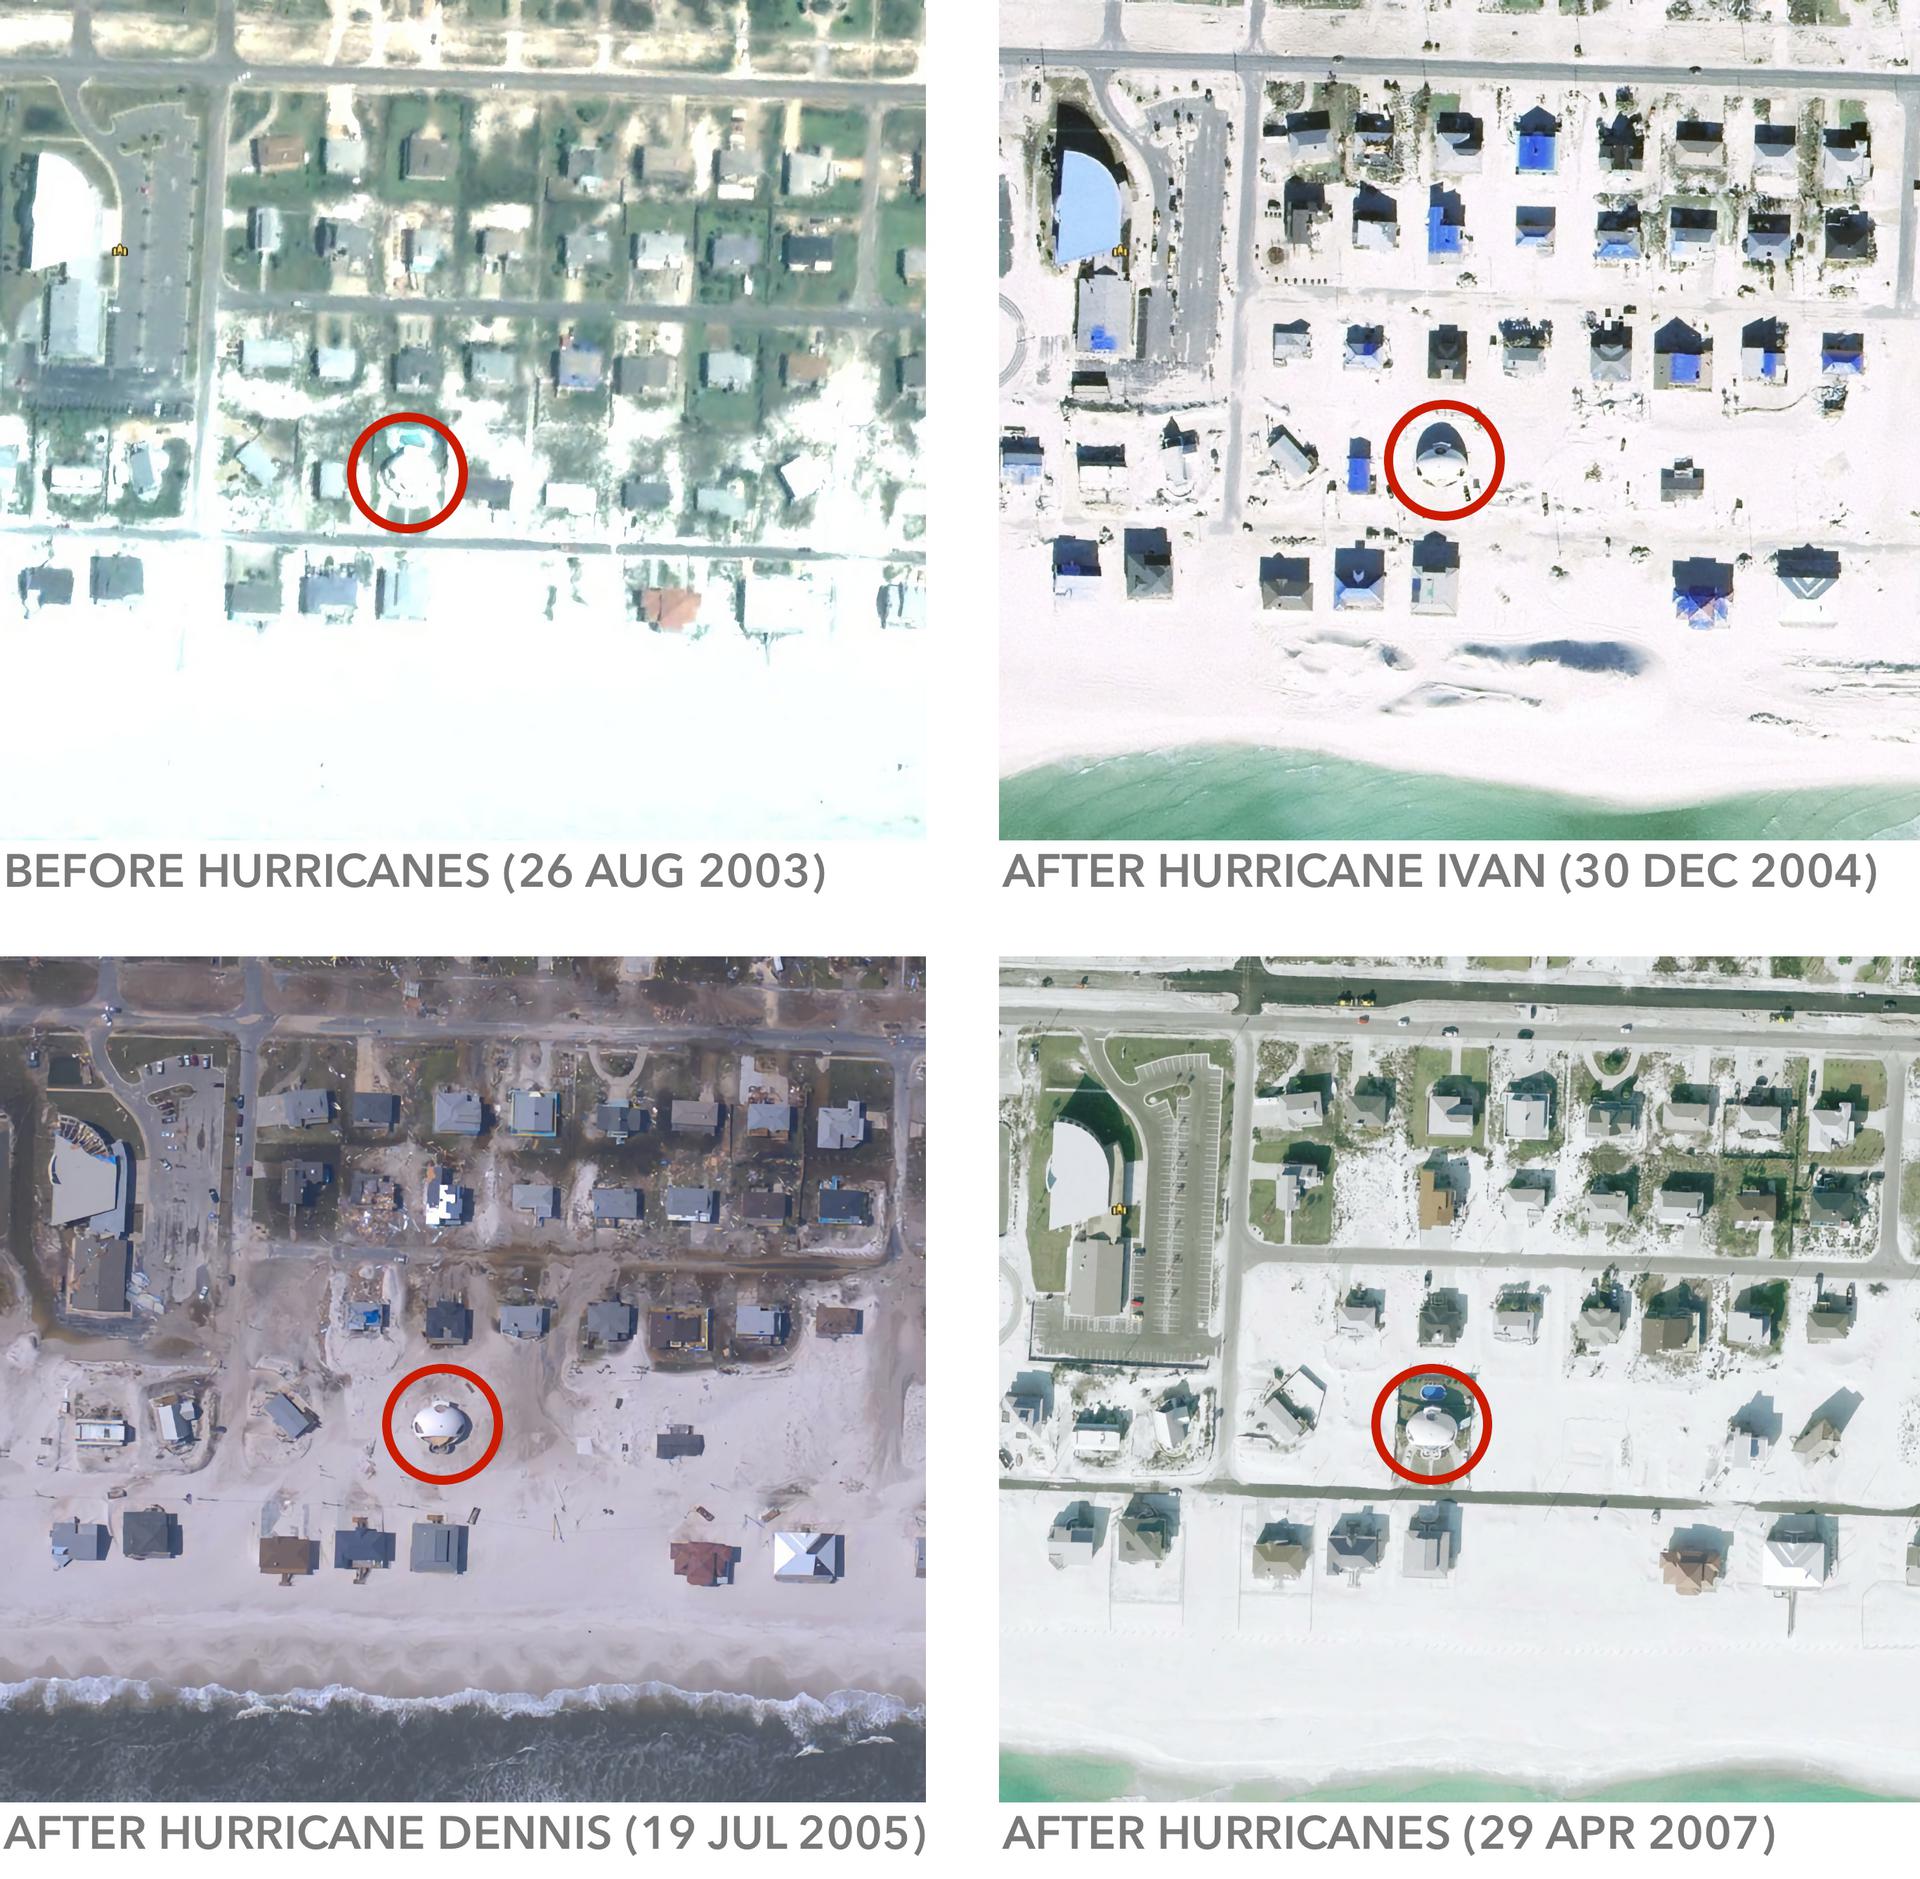 Satellite images of hurricane damage around Dome of a Home